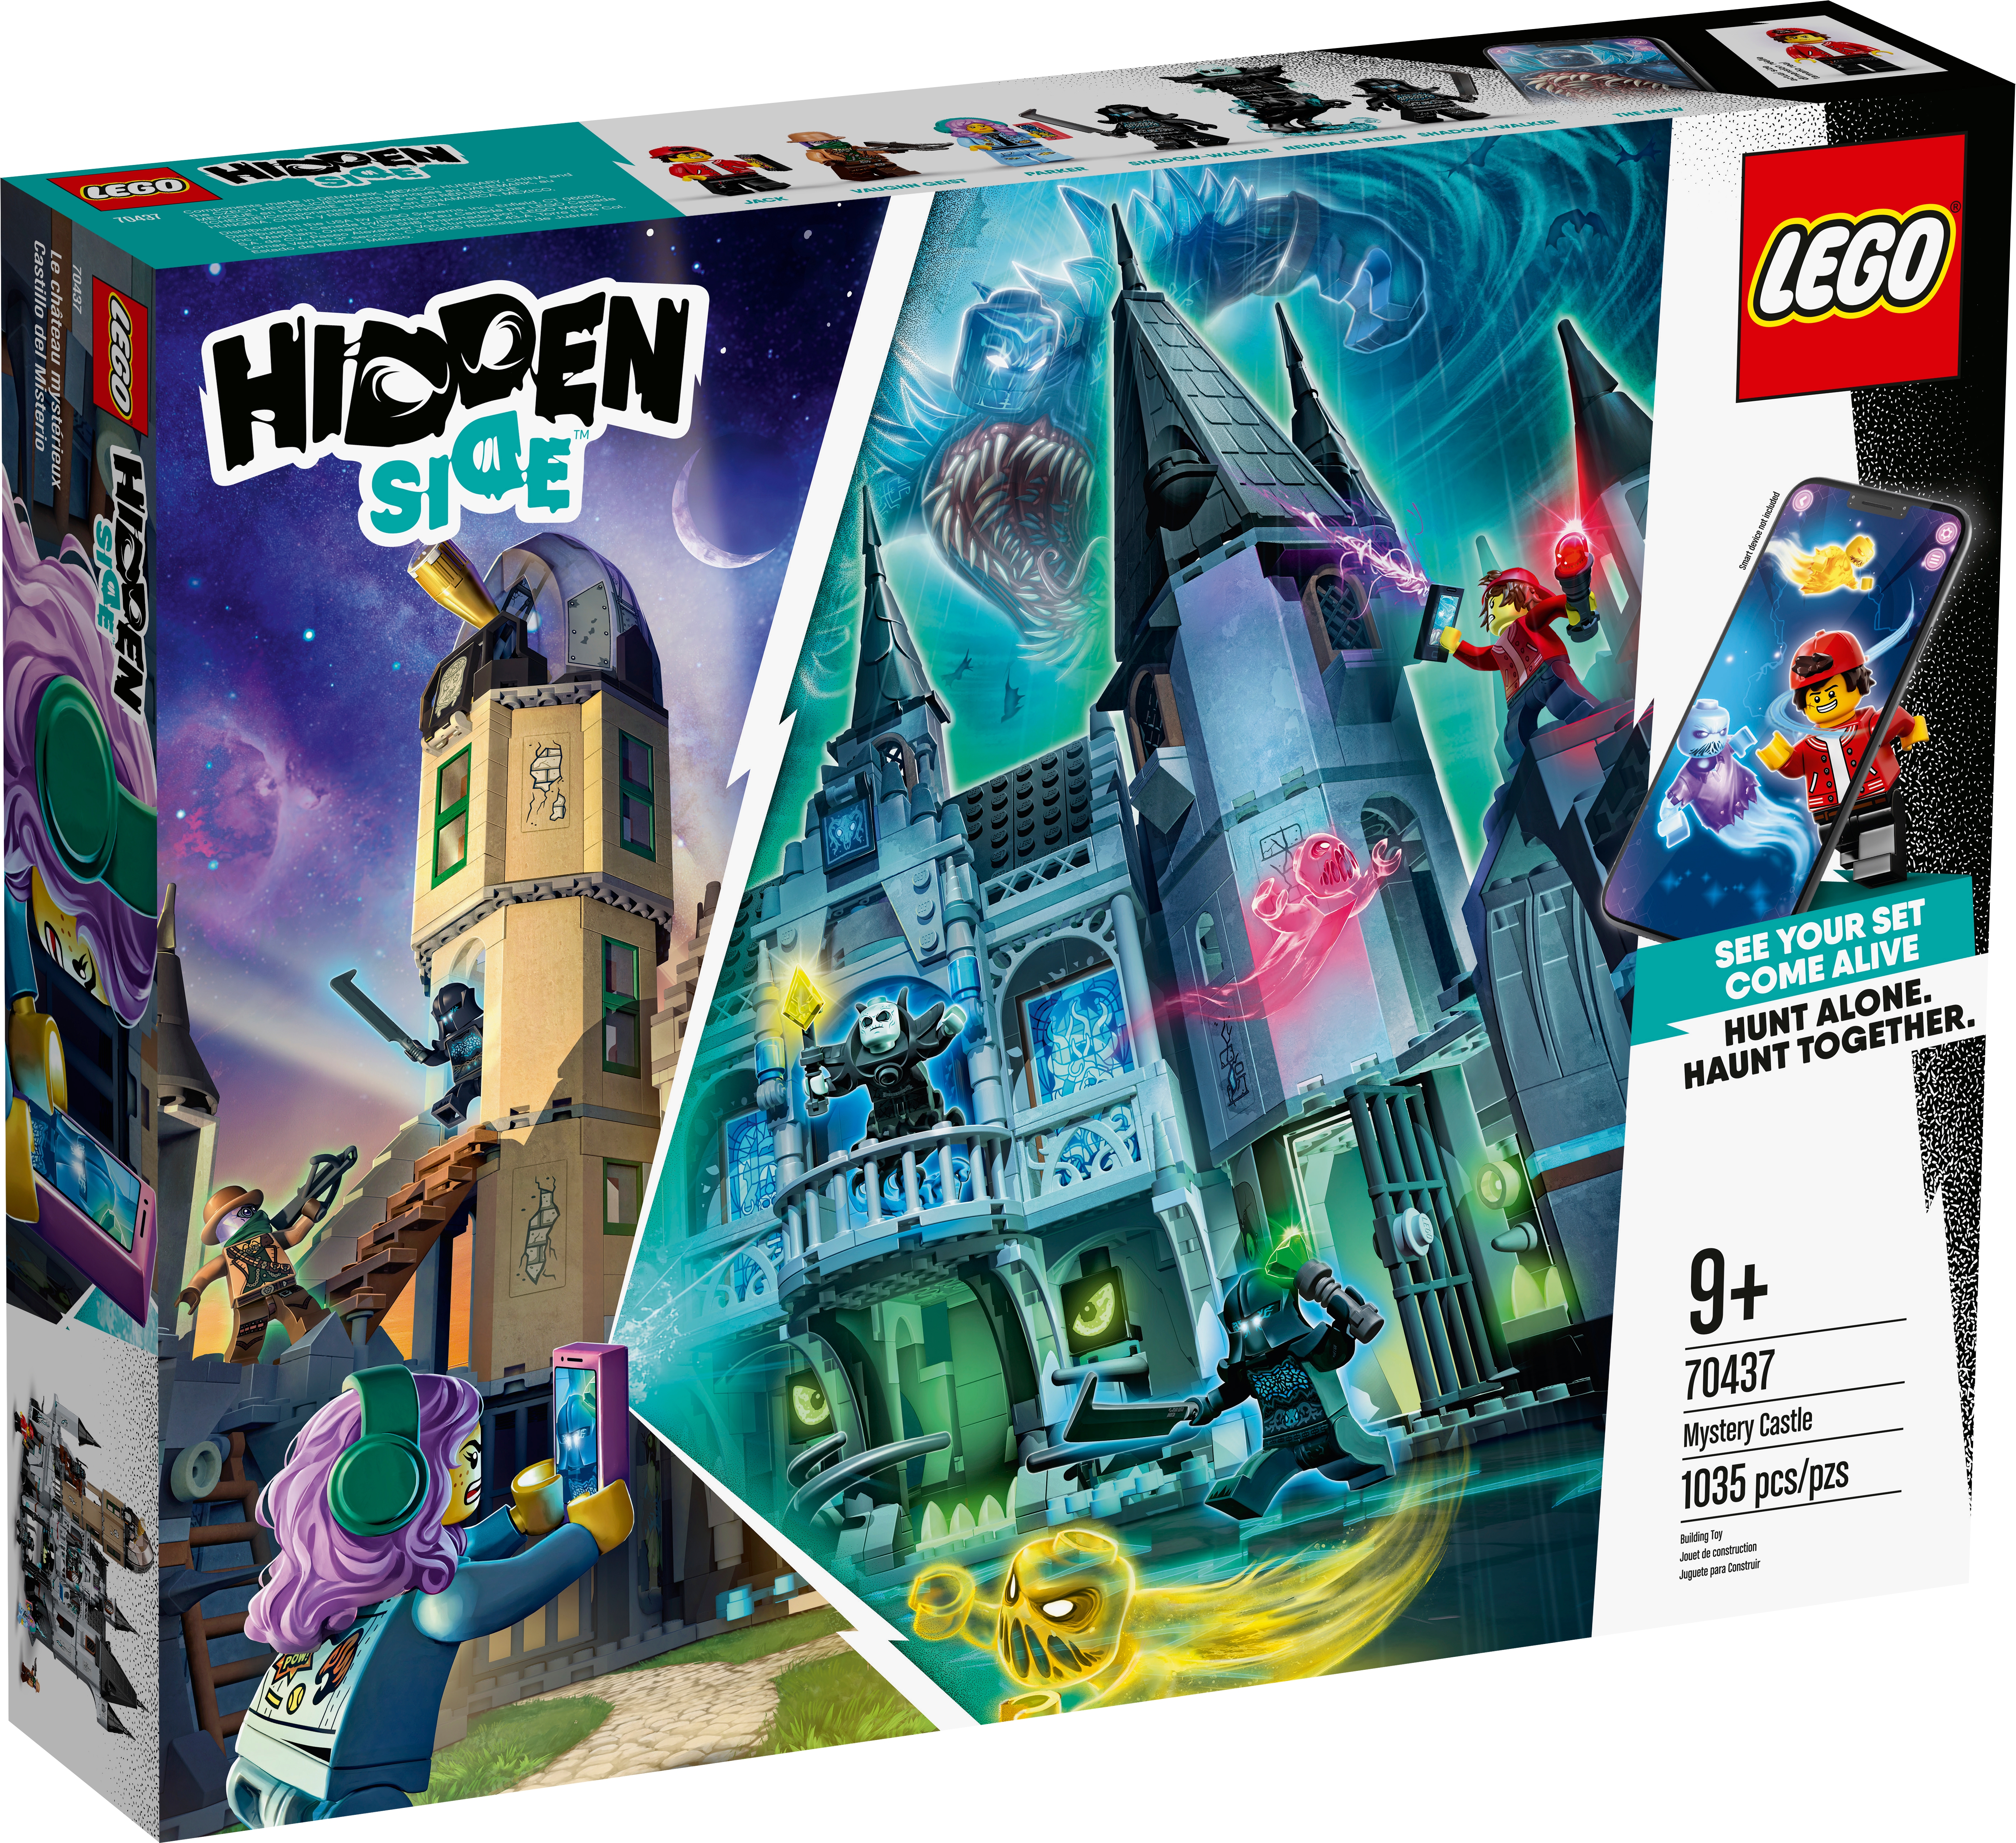 Mystery 70437 | Buy online at the Official LEGO® Shop US